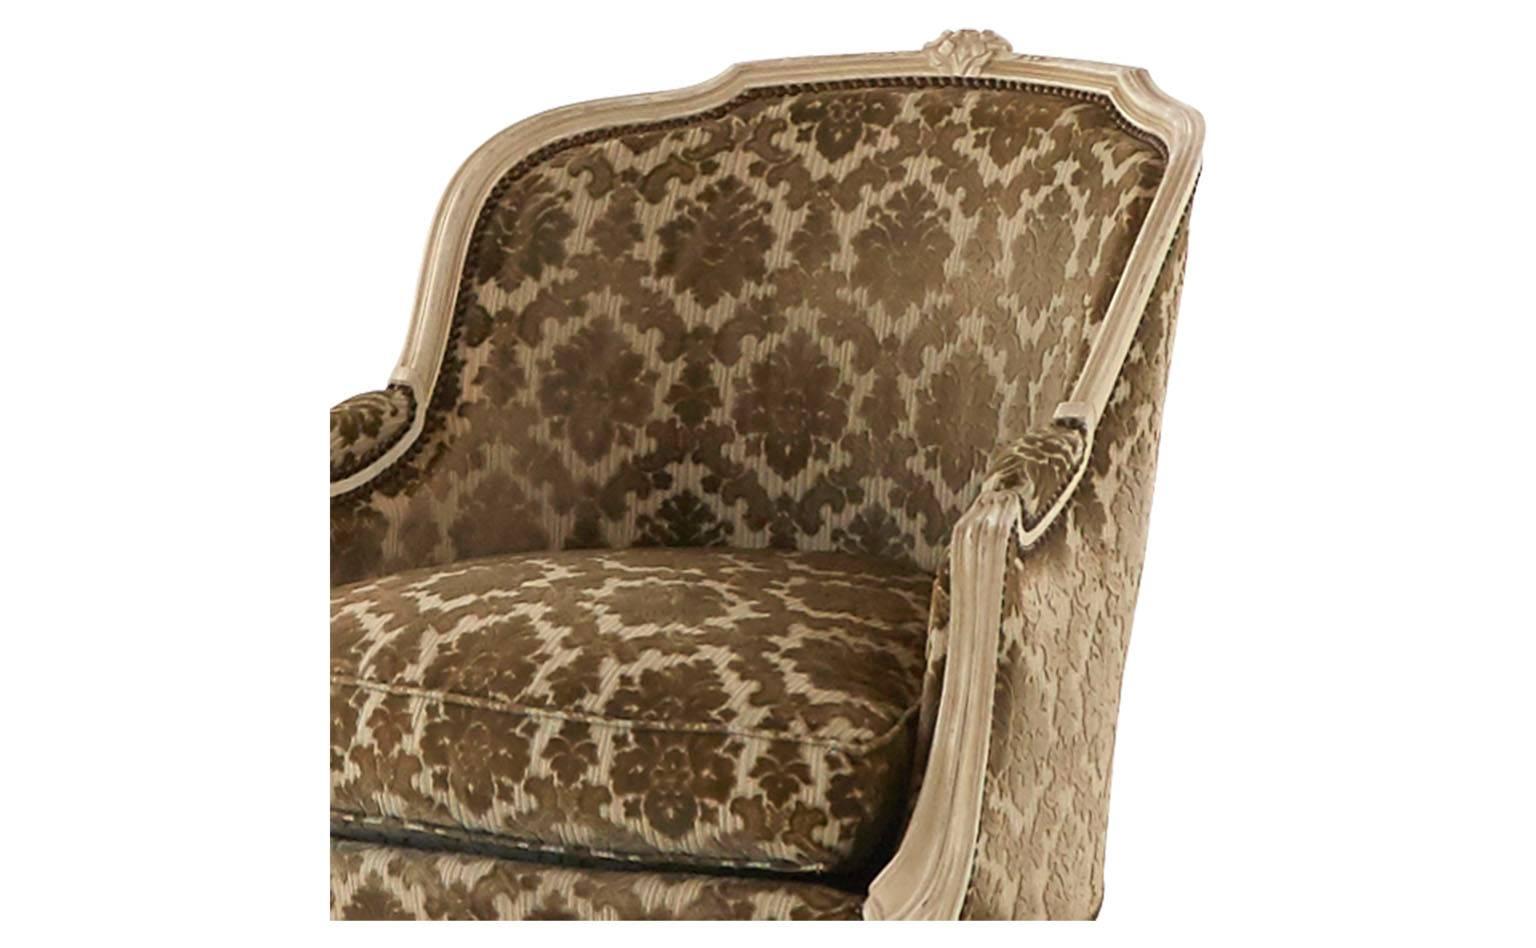 Original cut velvet upholstery,
hand-carved Louis XV style wood frame.
Ivory lacquer.
Antiqued nailhead,
20th century,
France.
Set of two available (priced individually).

Dimensions:
Overall: 28.5" W x 25" D x 35" H. 
Seat